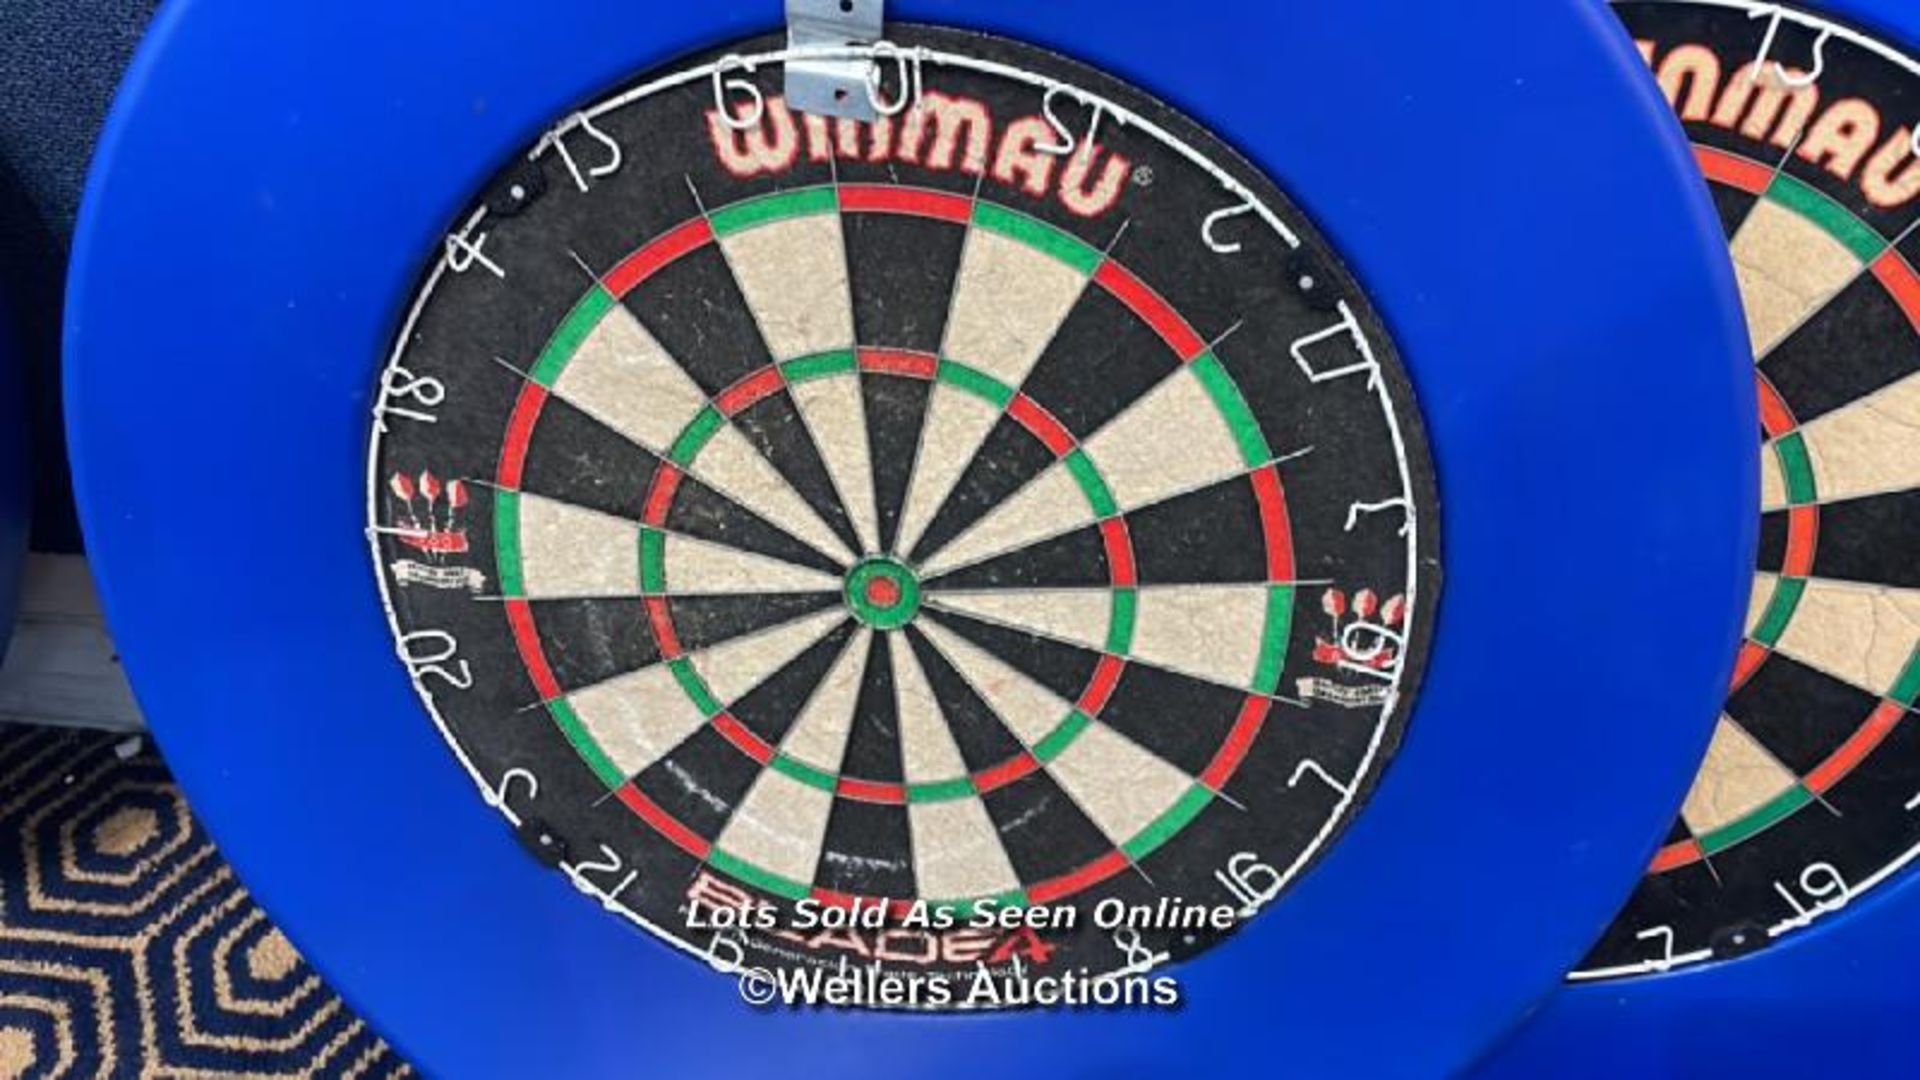 2X WINMAU BLADE 4 DART BOARDS WITH SURROUNDS / COLLECTION LOCATION: OLD WOKING DISTRICT - Image 2 of 3